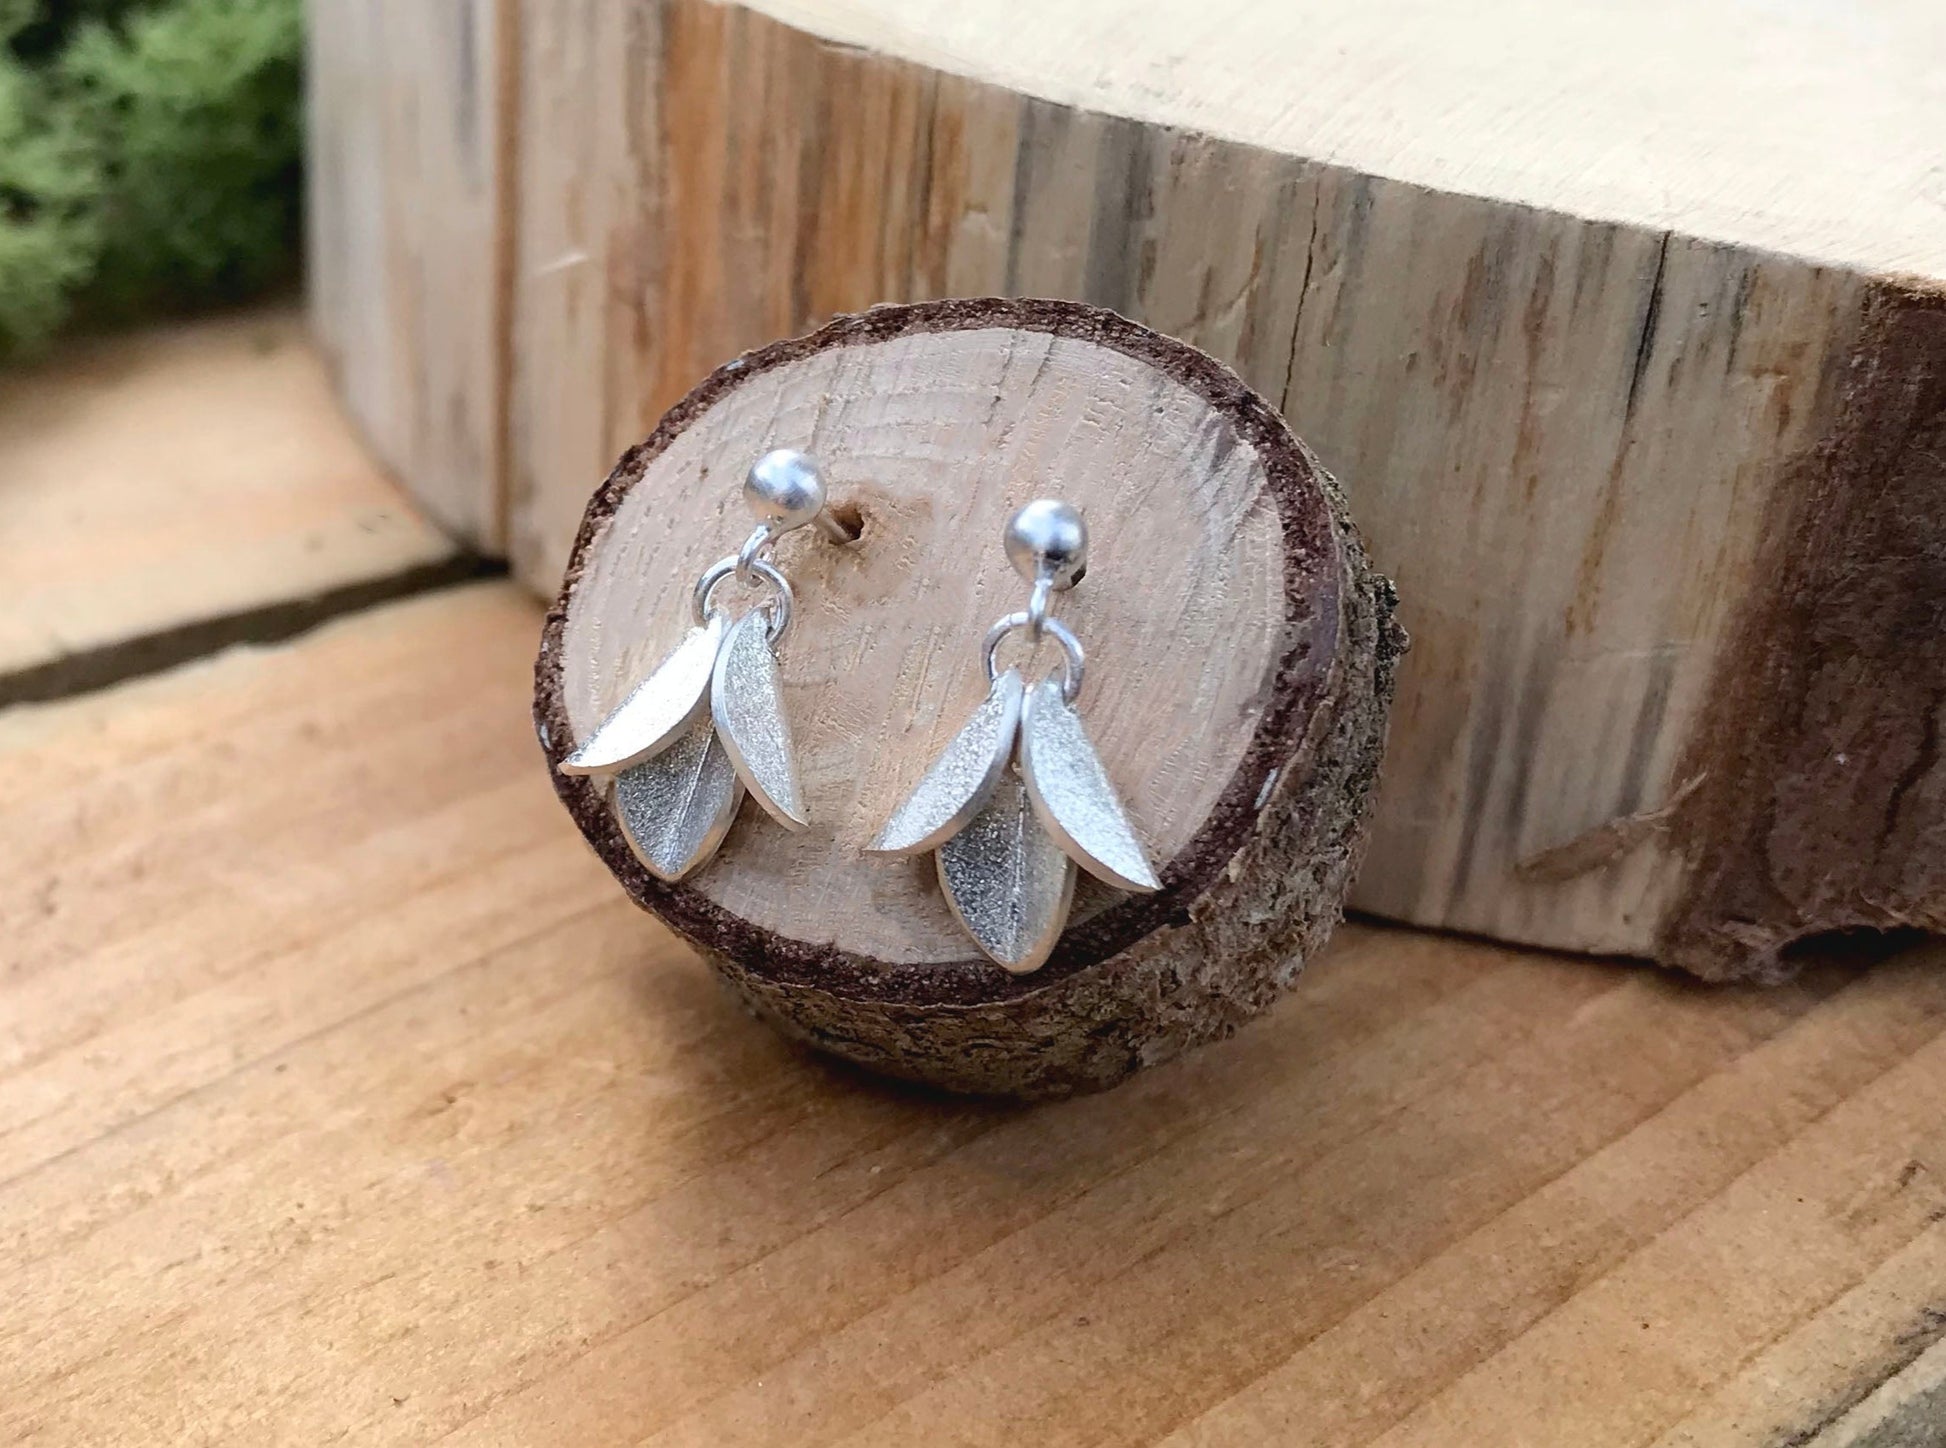 Silver Bluebell Earrings by Curious Magpie